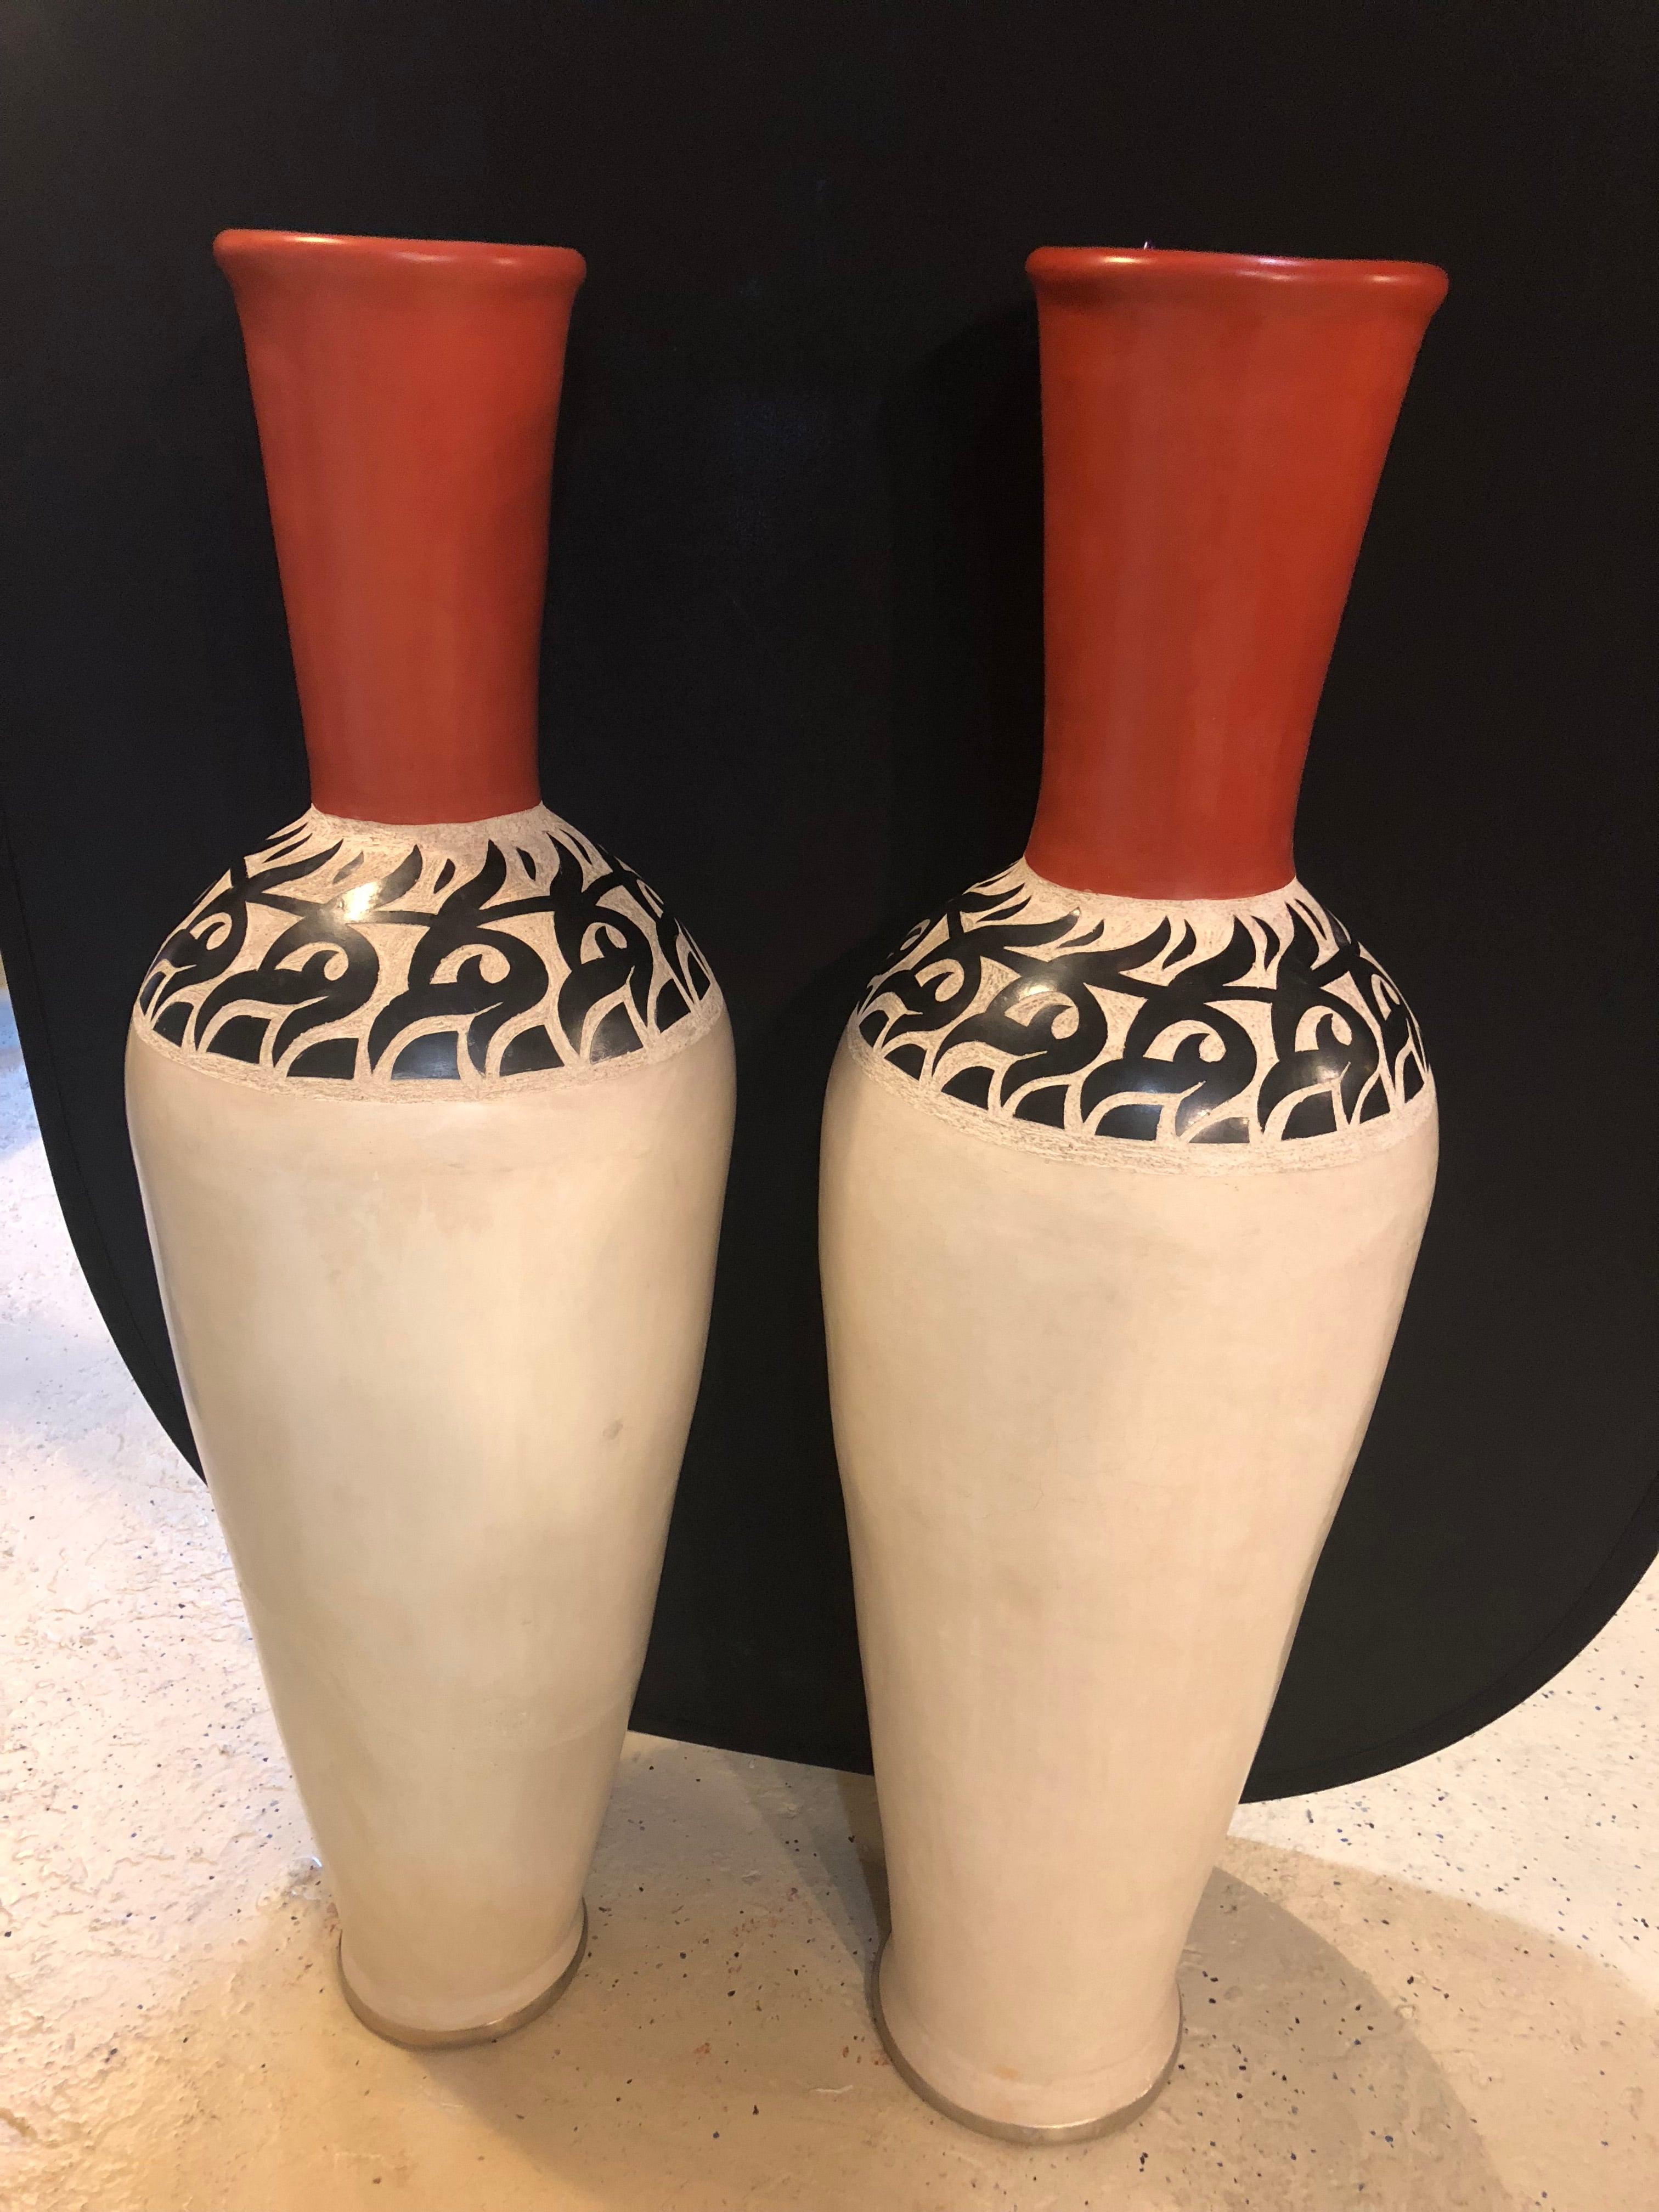 Monumental Moroccan Pottery Vase or Urn Handmade in Red and White, a Pair 5